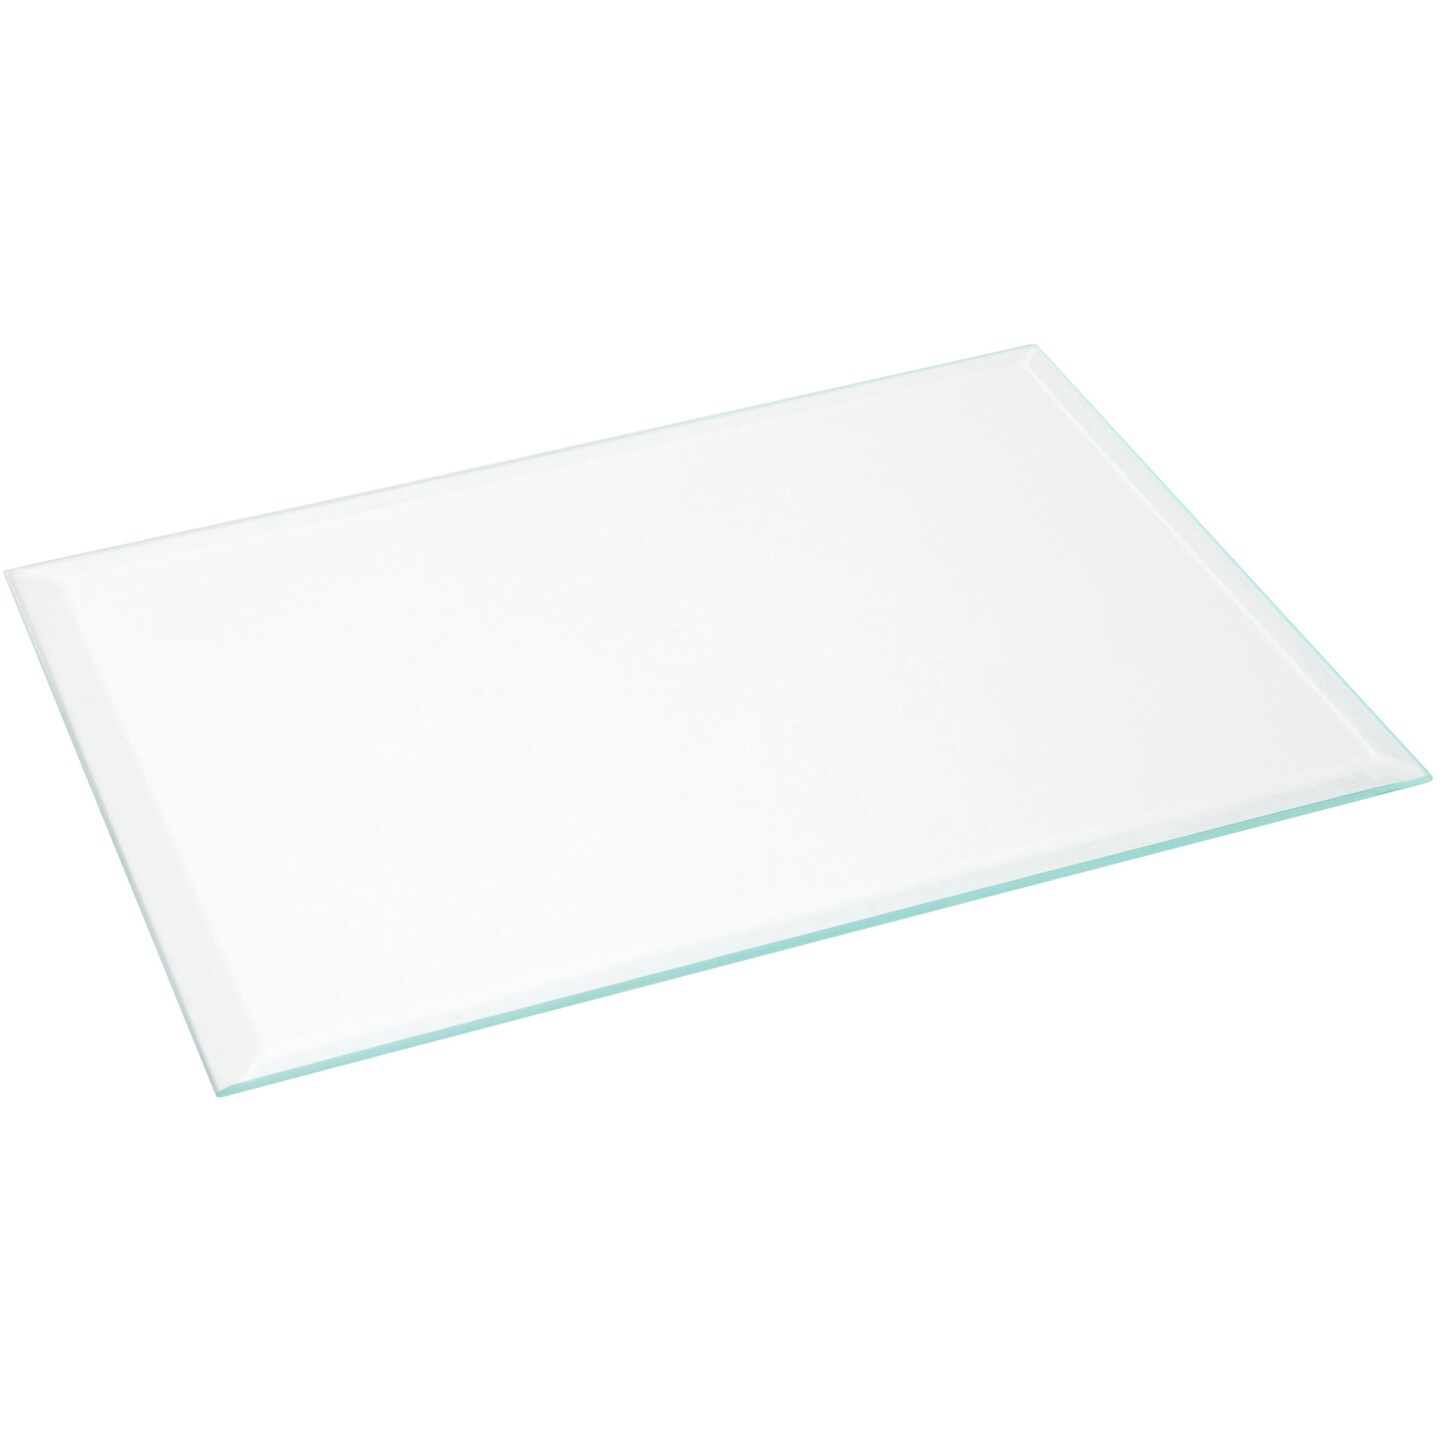 Plymor Rectangle 3mm Beveled Clear Glass, 5 inch x 7 inch